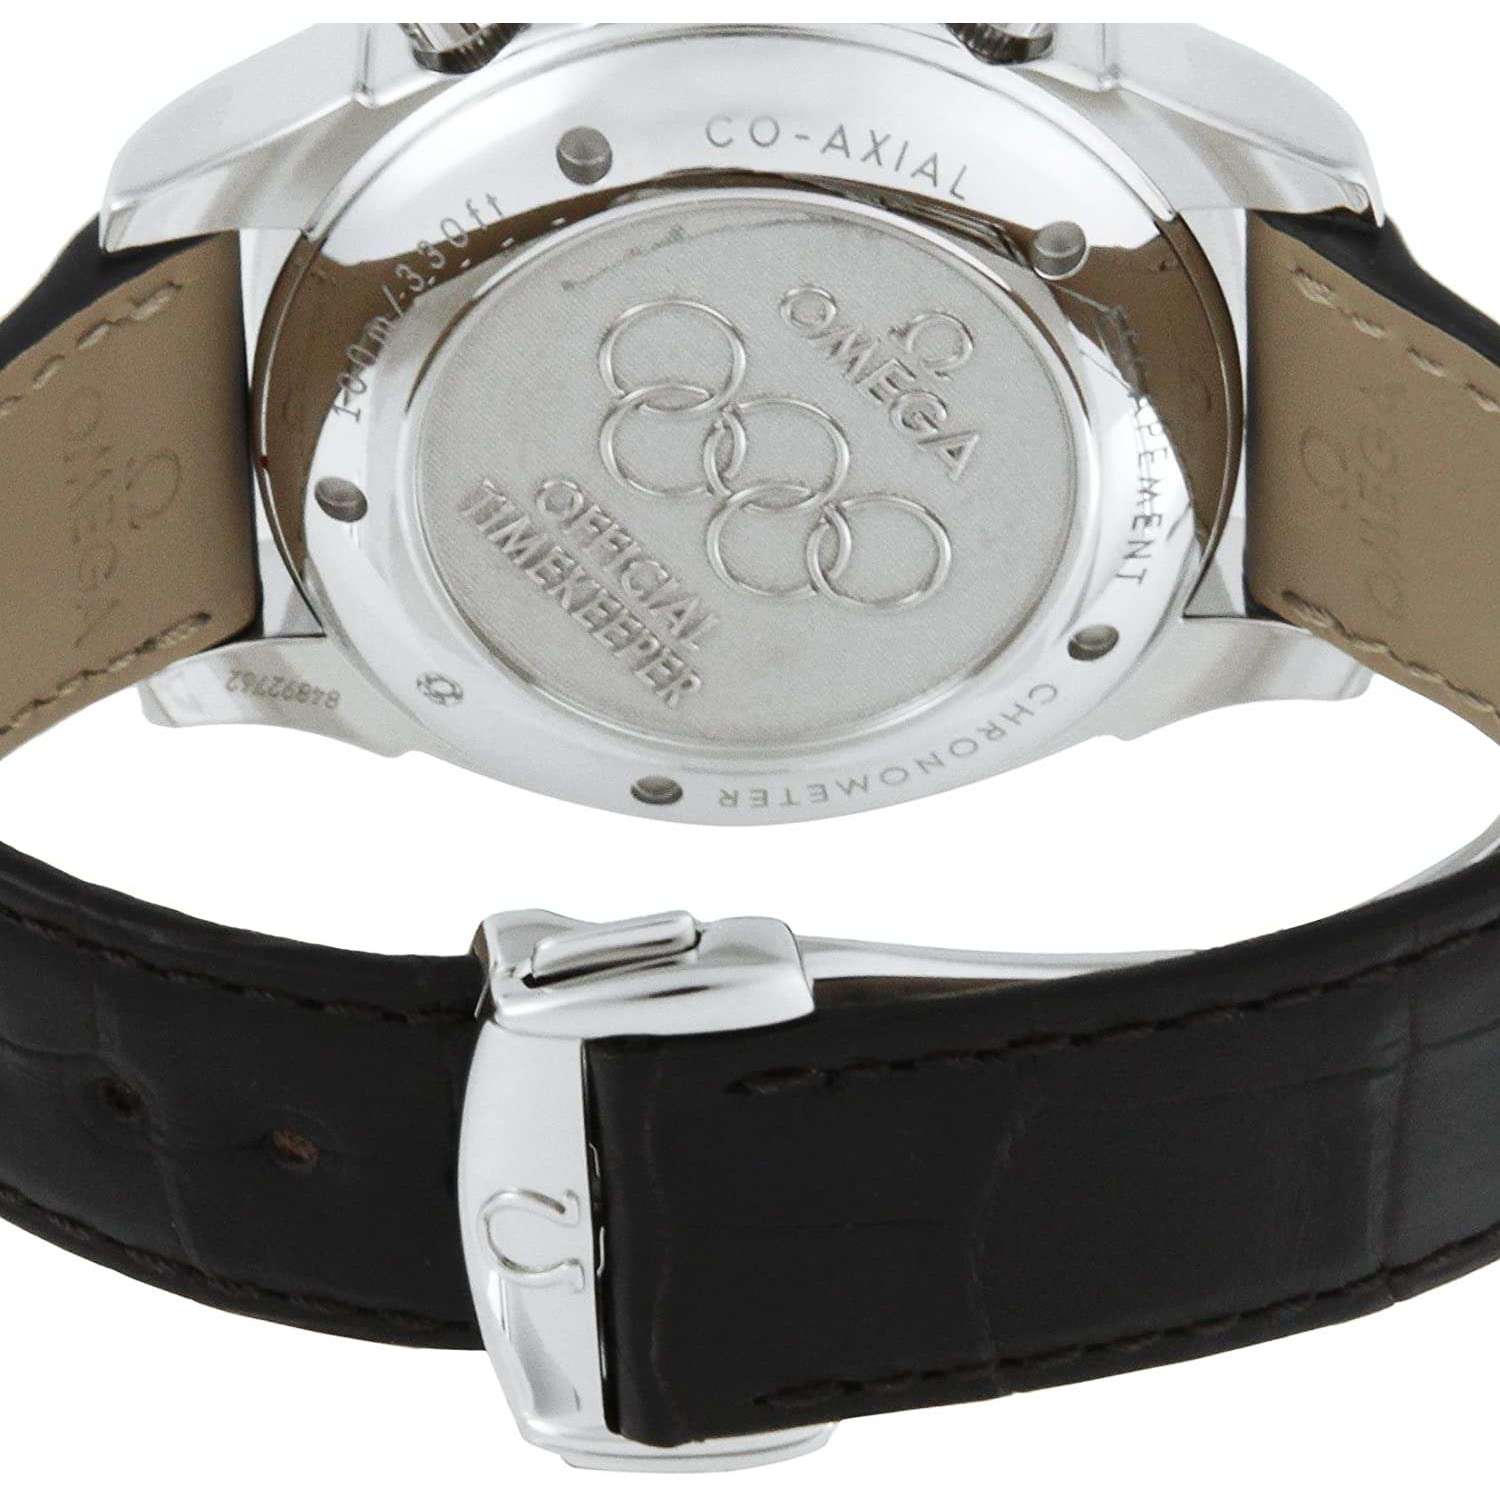 ROOK JAPAN:OMEGA DE VILLE SPECIALITIES OLYMPIC GAMES 43 MM MEN WATCH (LIMITED EDITION) 422.13.41.52.04.001,Luxury Watch,Omega